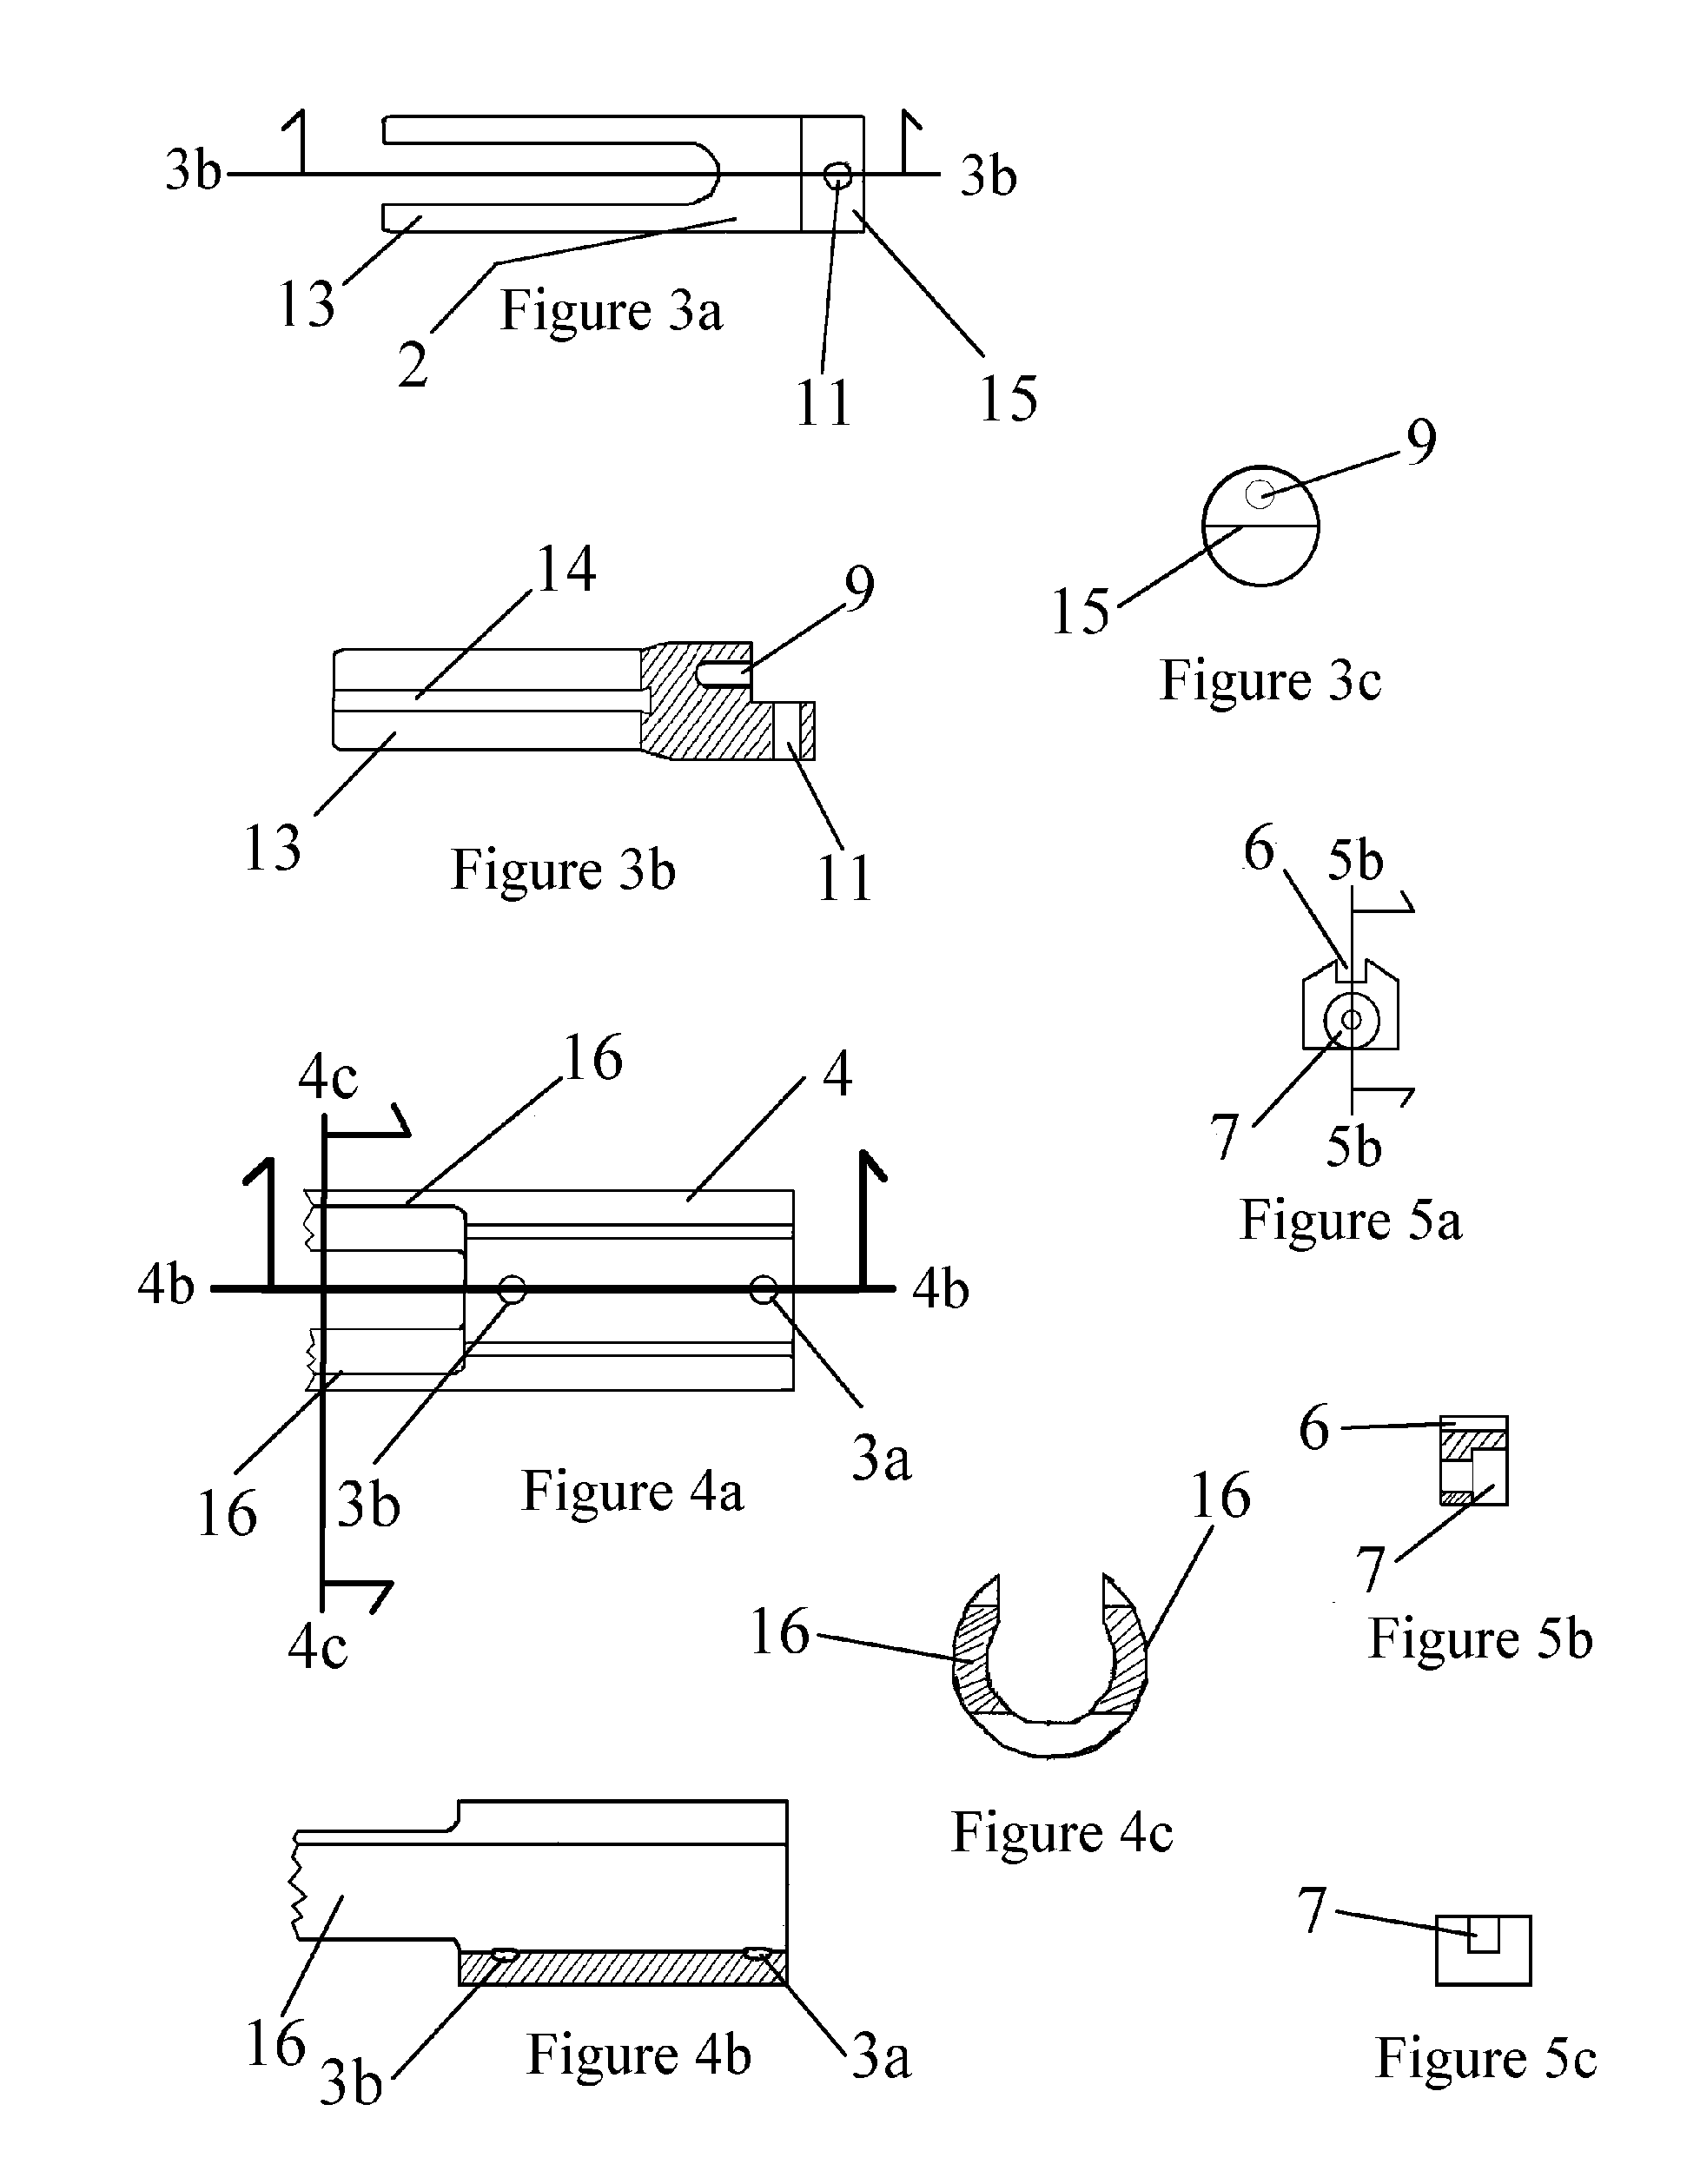 Firing Rate Reduction System for an Automatic Firearm